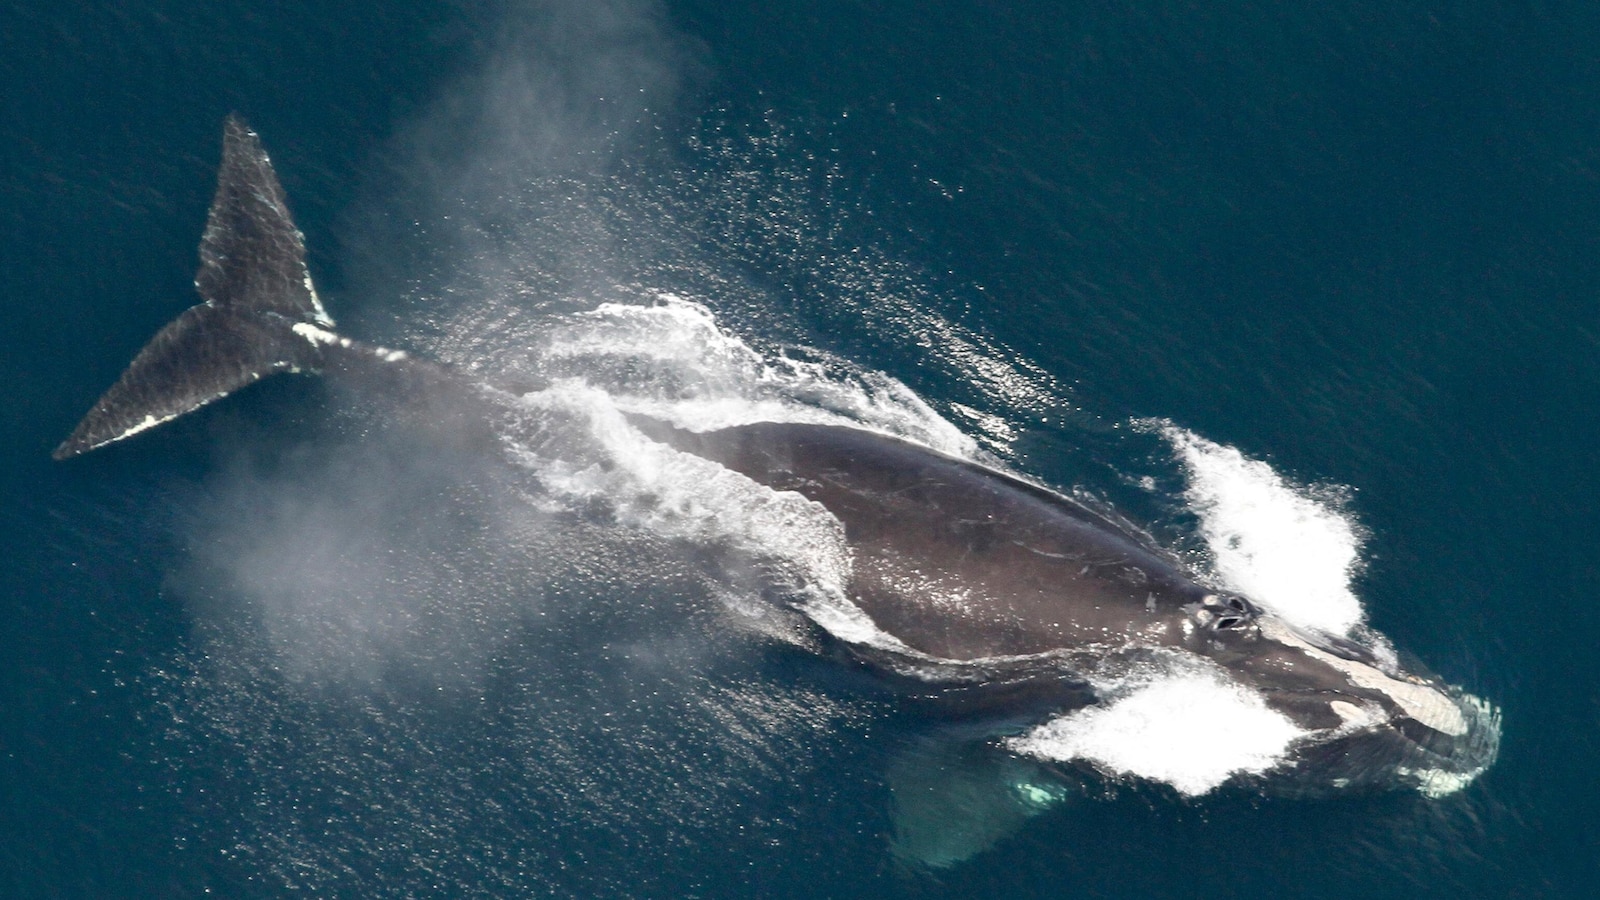 Environmental groups decry attempt to delay shipping rules intended to save whales